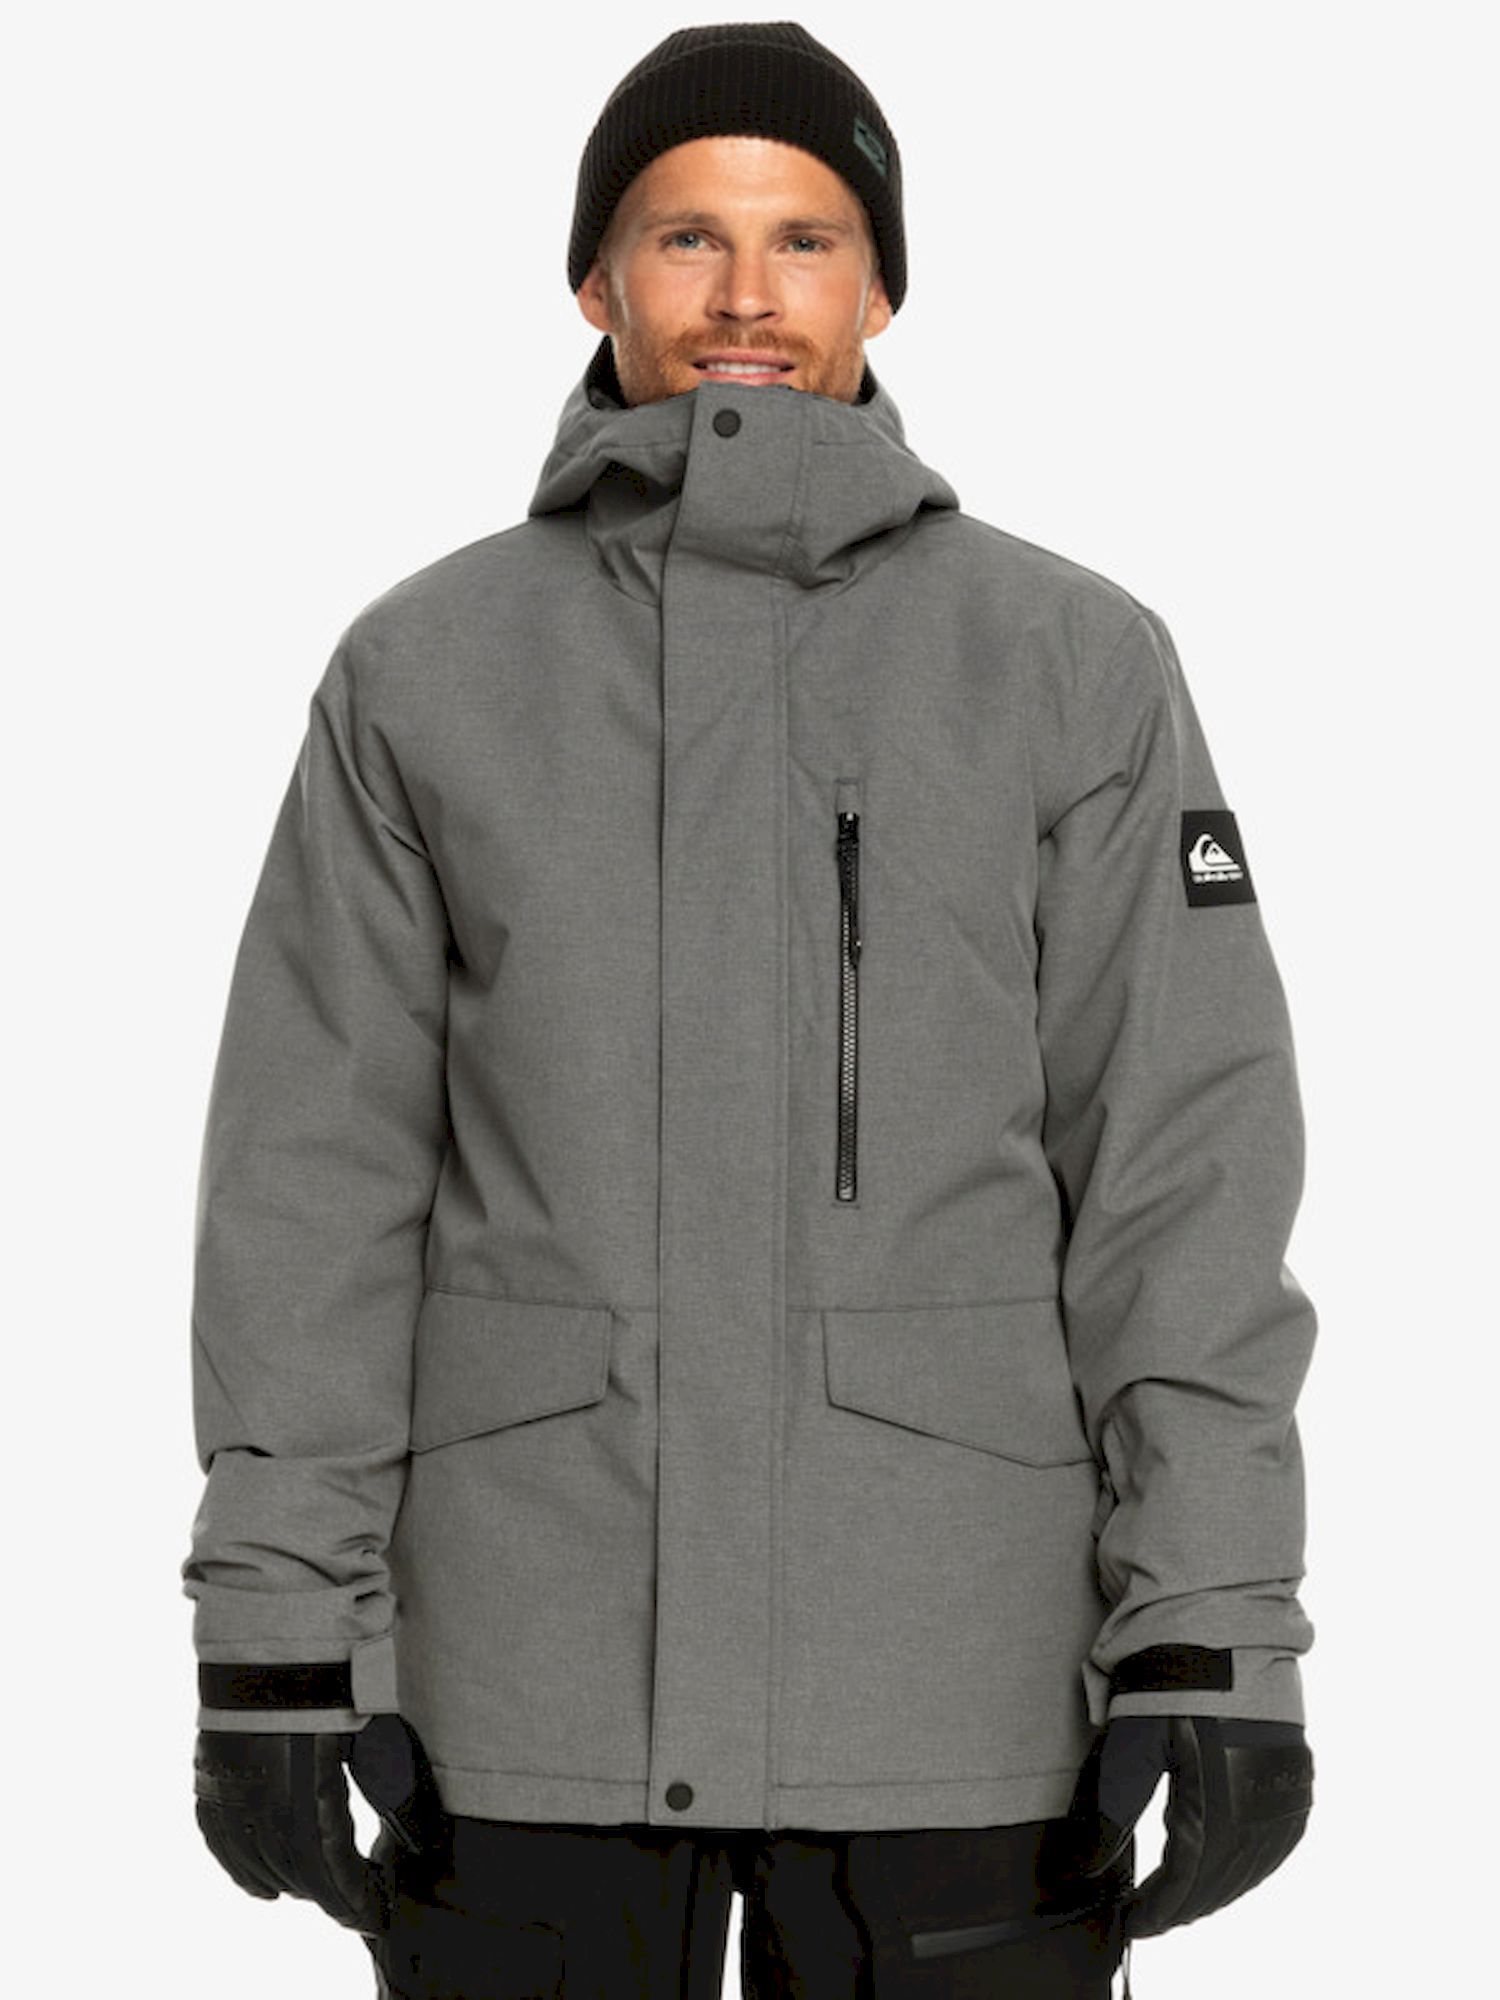 Quiksilver Mission Solid Jacket - Giacca da sci - Uomo | Hardloop